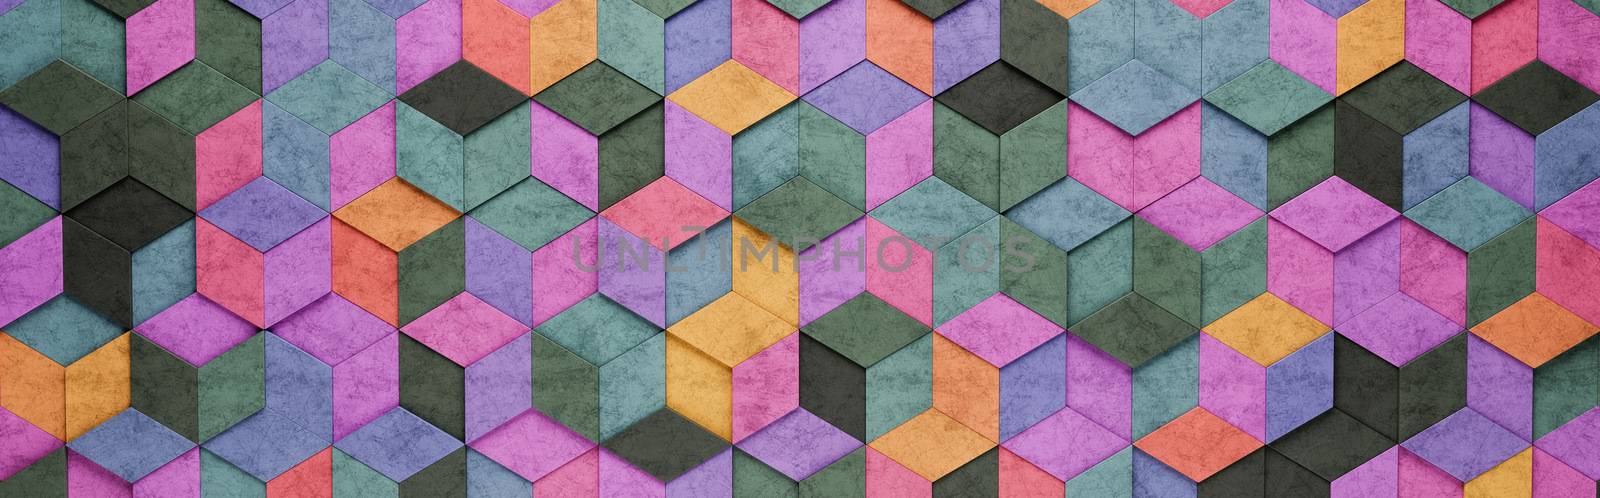 Colorful Rhombus and Hexagons 3D Pattern Background by make